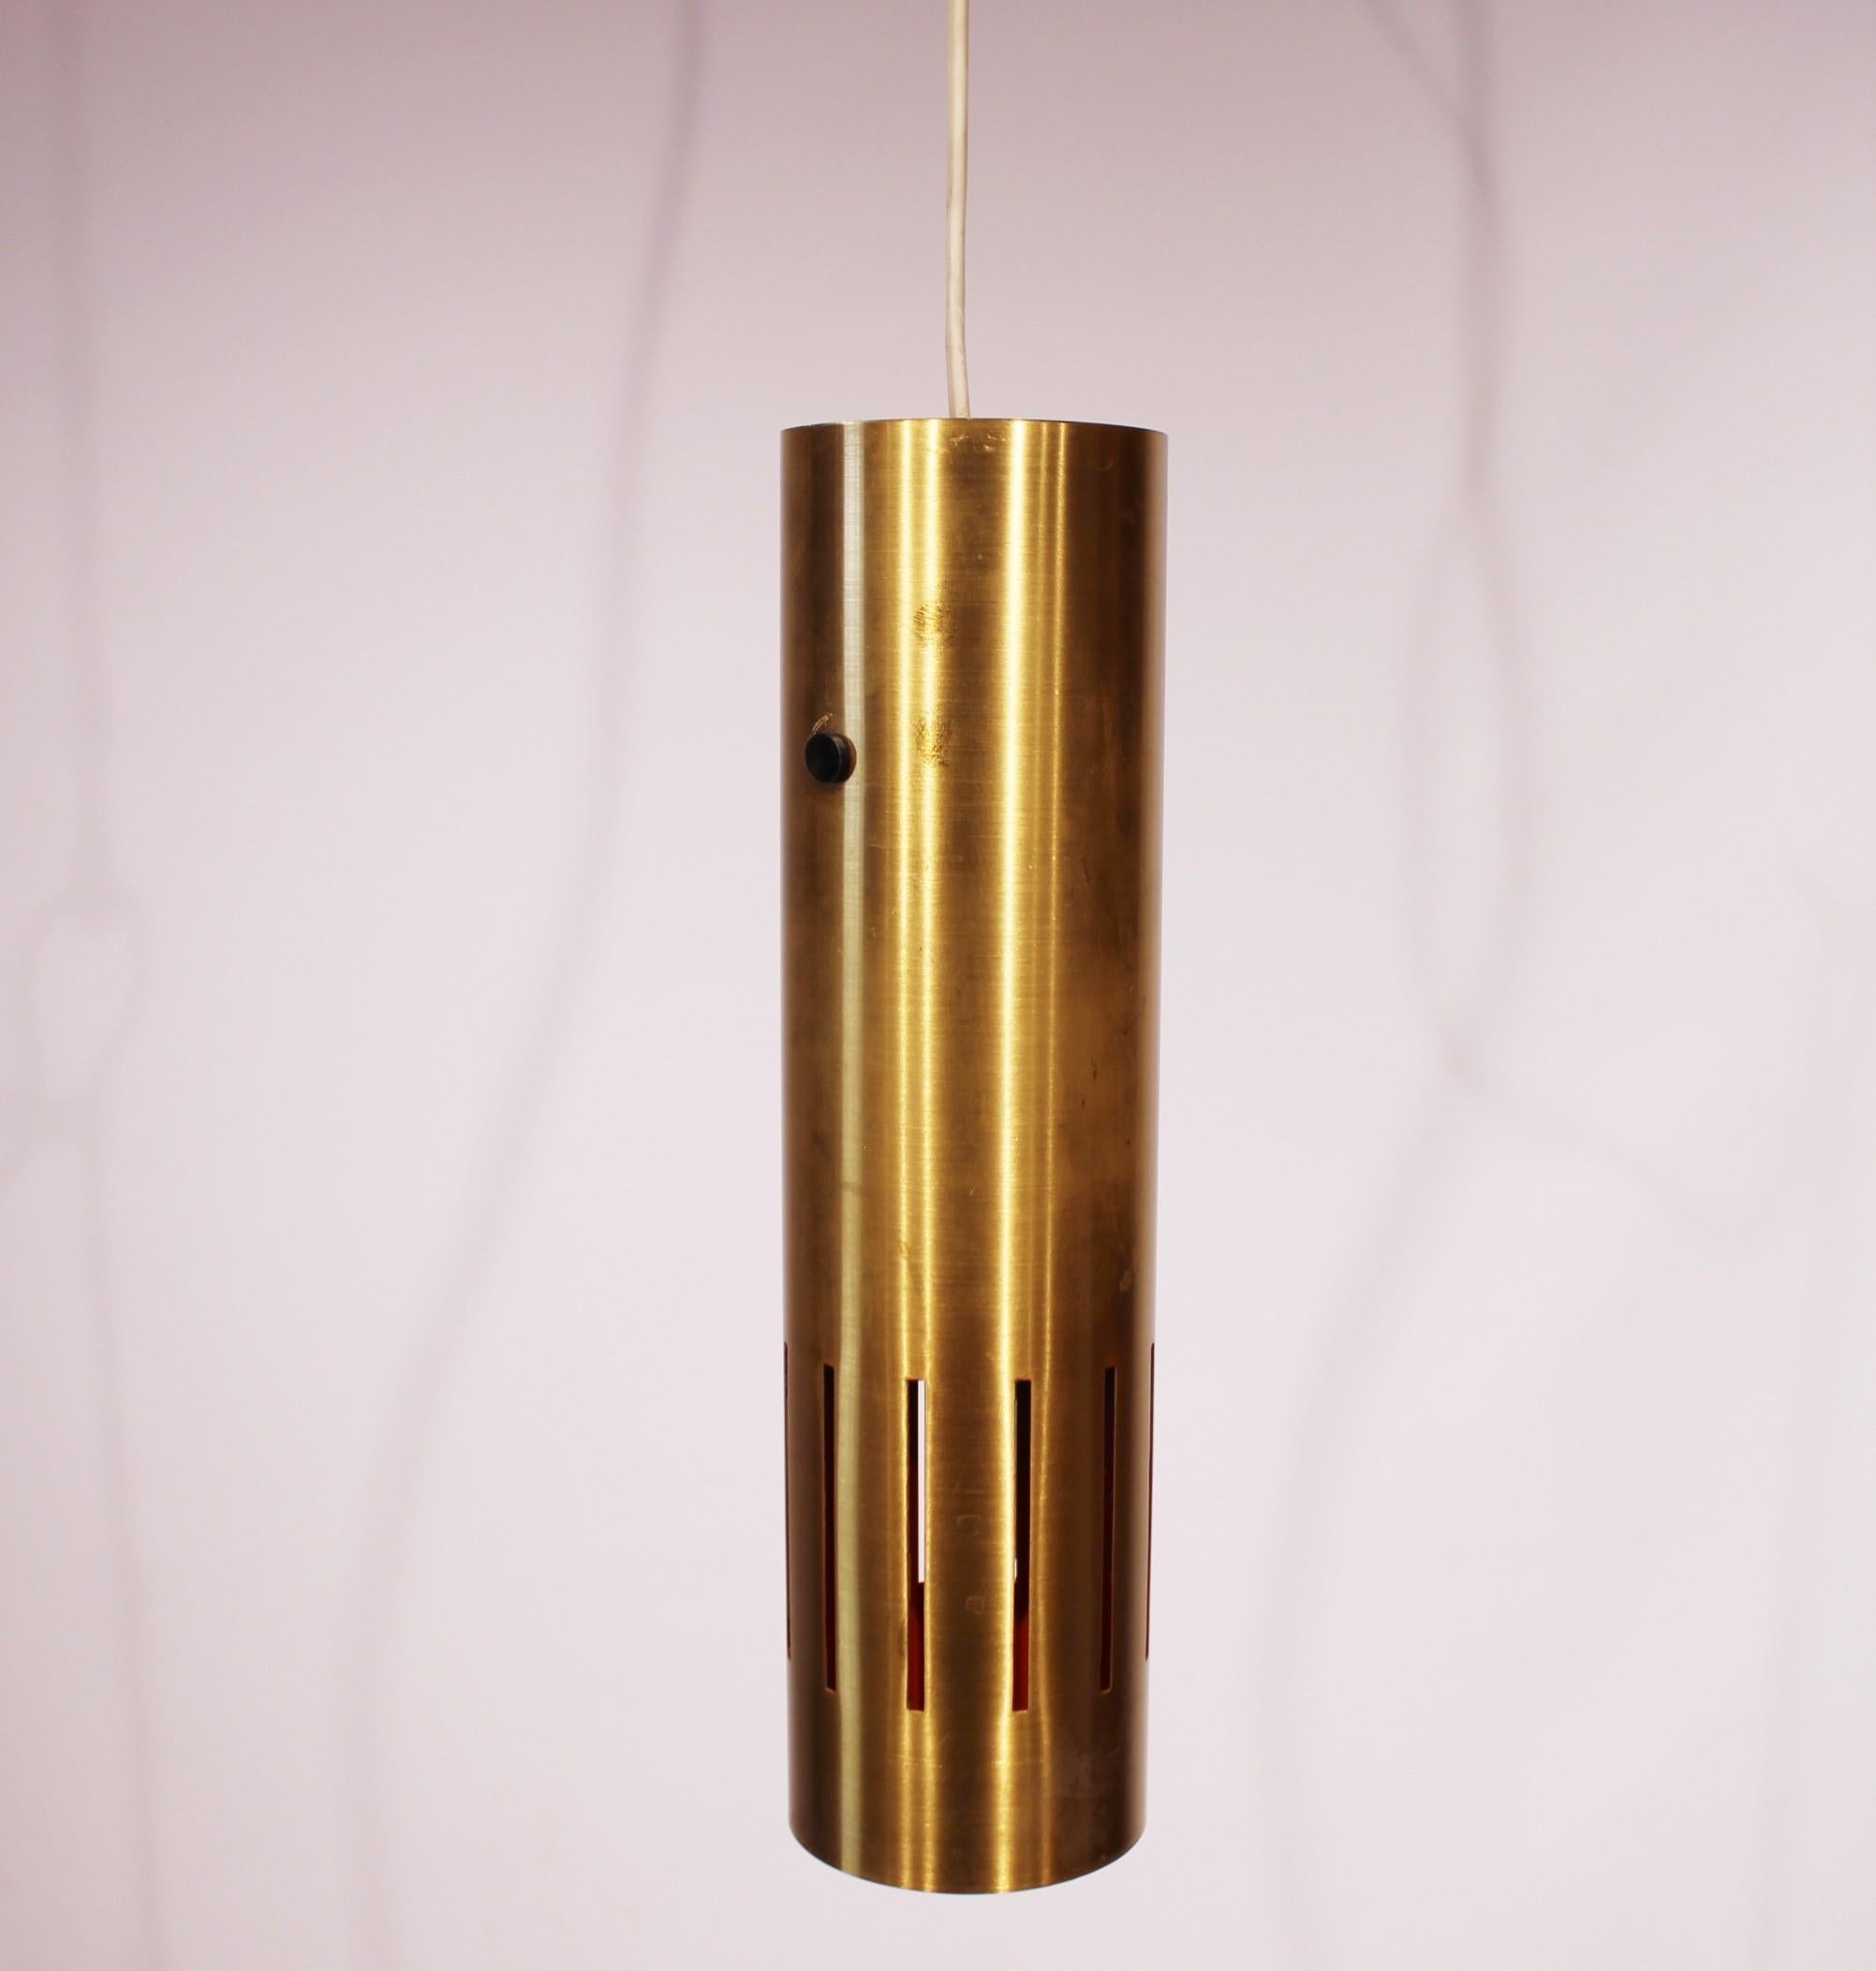 Vintage ceiling pendant in brass and orange lacquer interior of Danish design from the 1970s. The lamp is in great vintage condition.